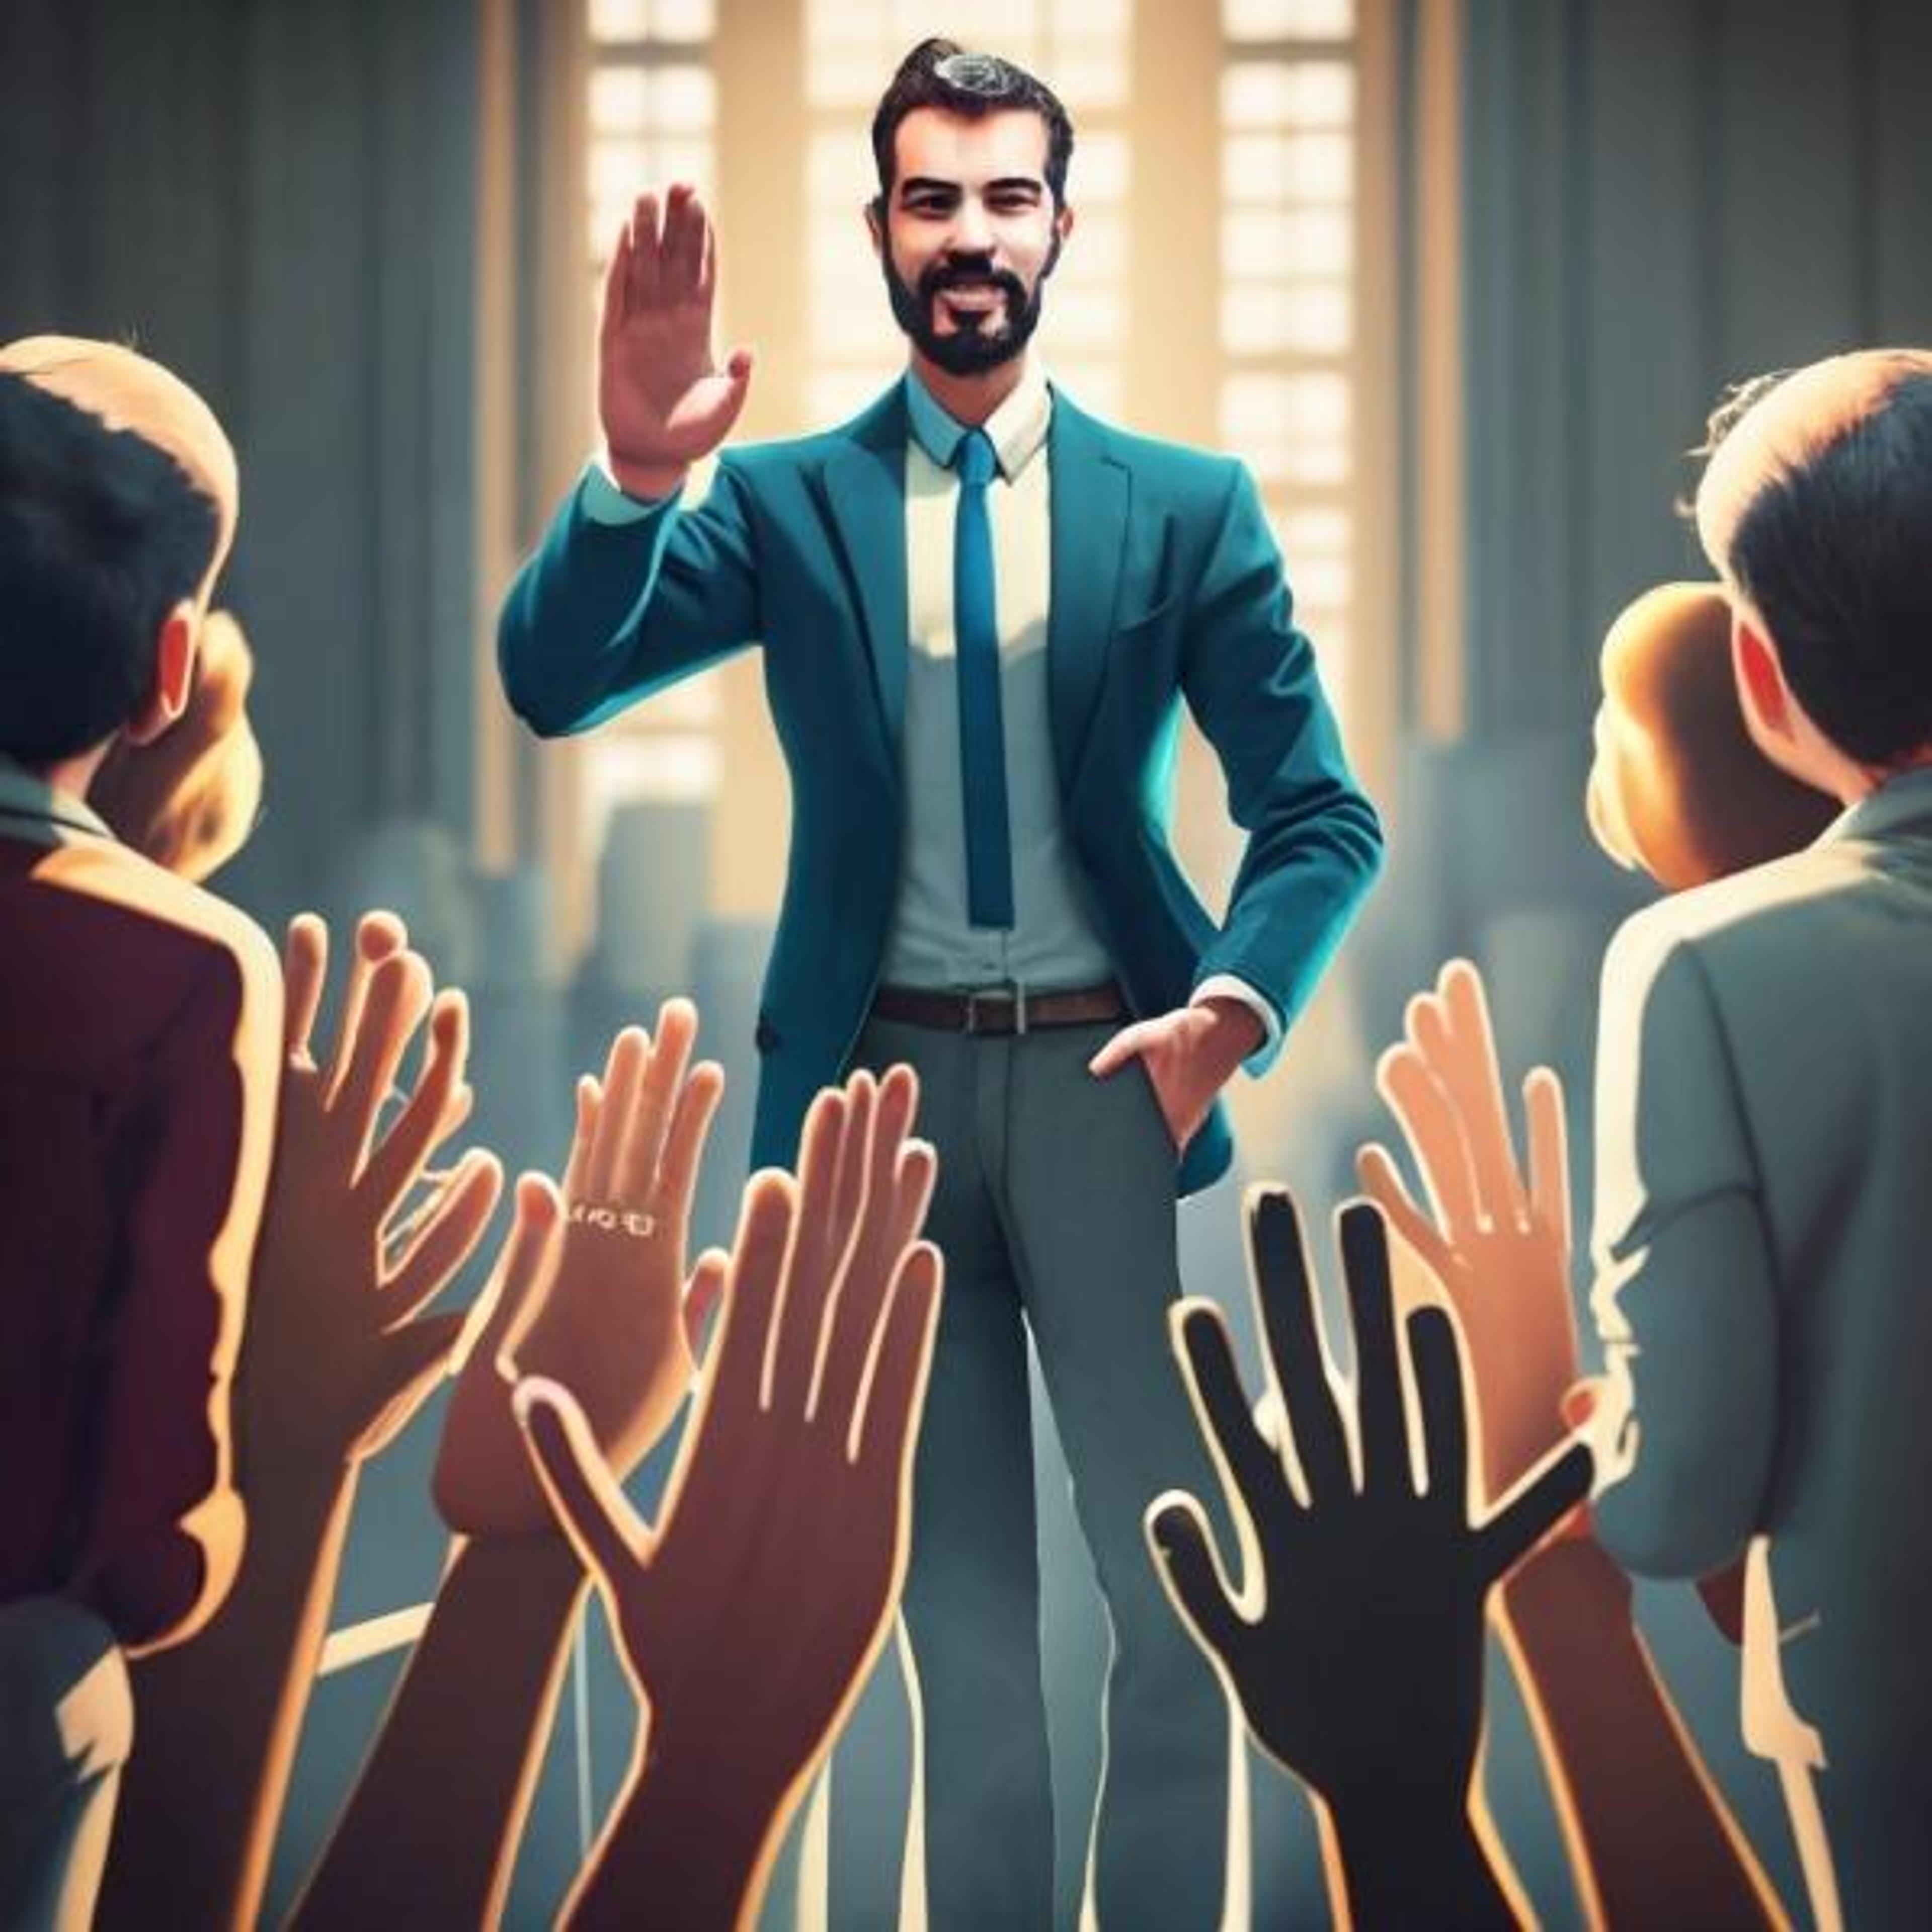 Made on ideogram, prompt: careers consultant leading a pack of students, making them take an oath by putting their hands up, all together, 3d render, poster